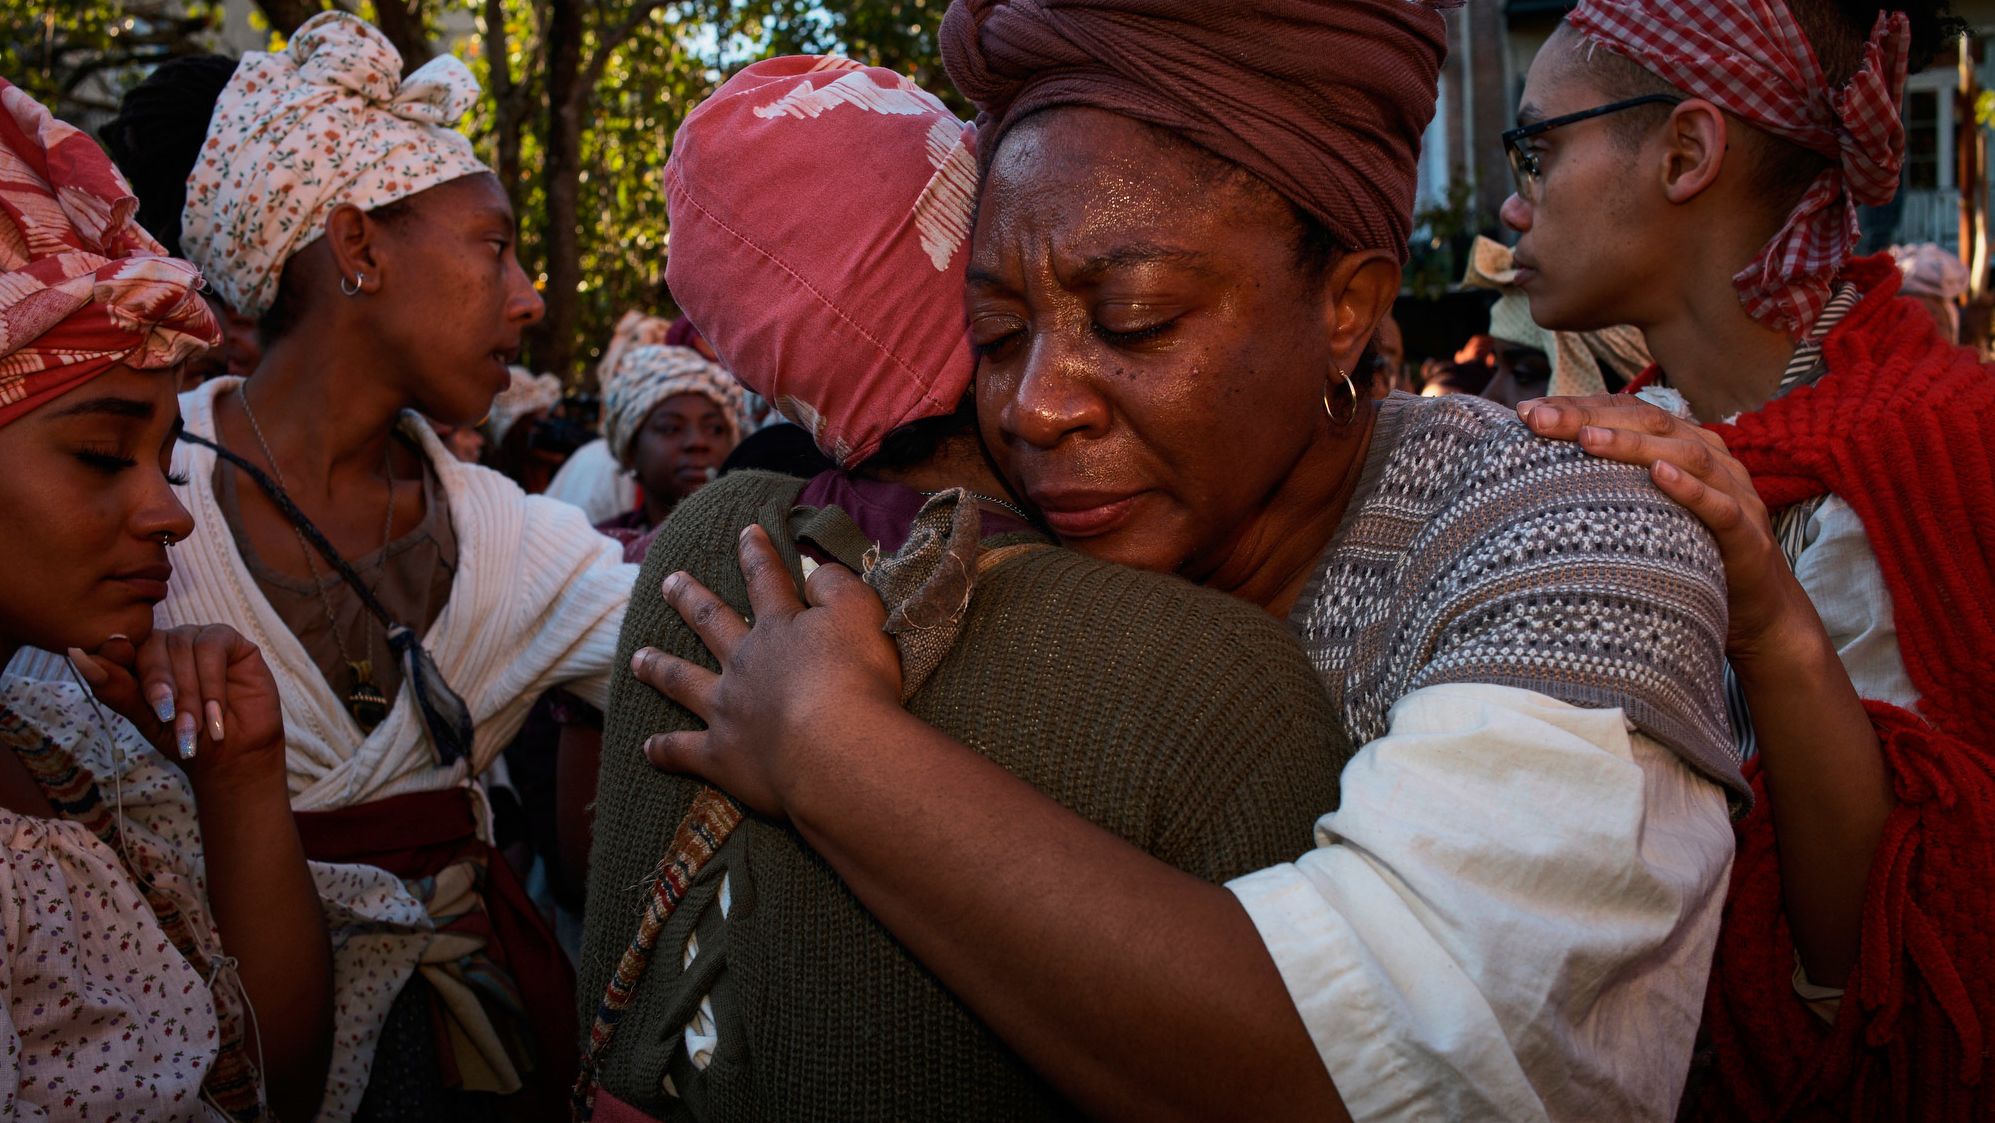 Aretha Campbell of Brooklyn, New York, is comforted after becoming emotional in New Orleans. The 1811 rebellion never reached the city, but in this recreation the second day examined what could have happened if it had.